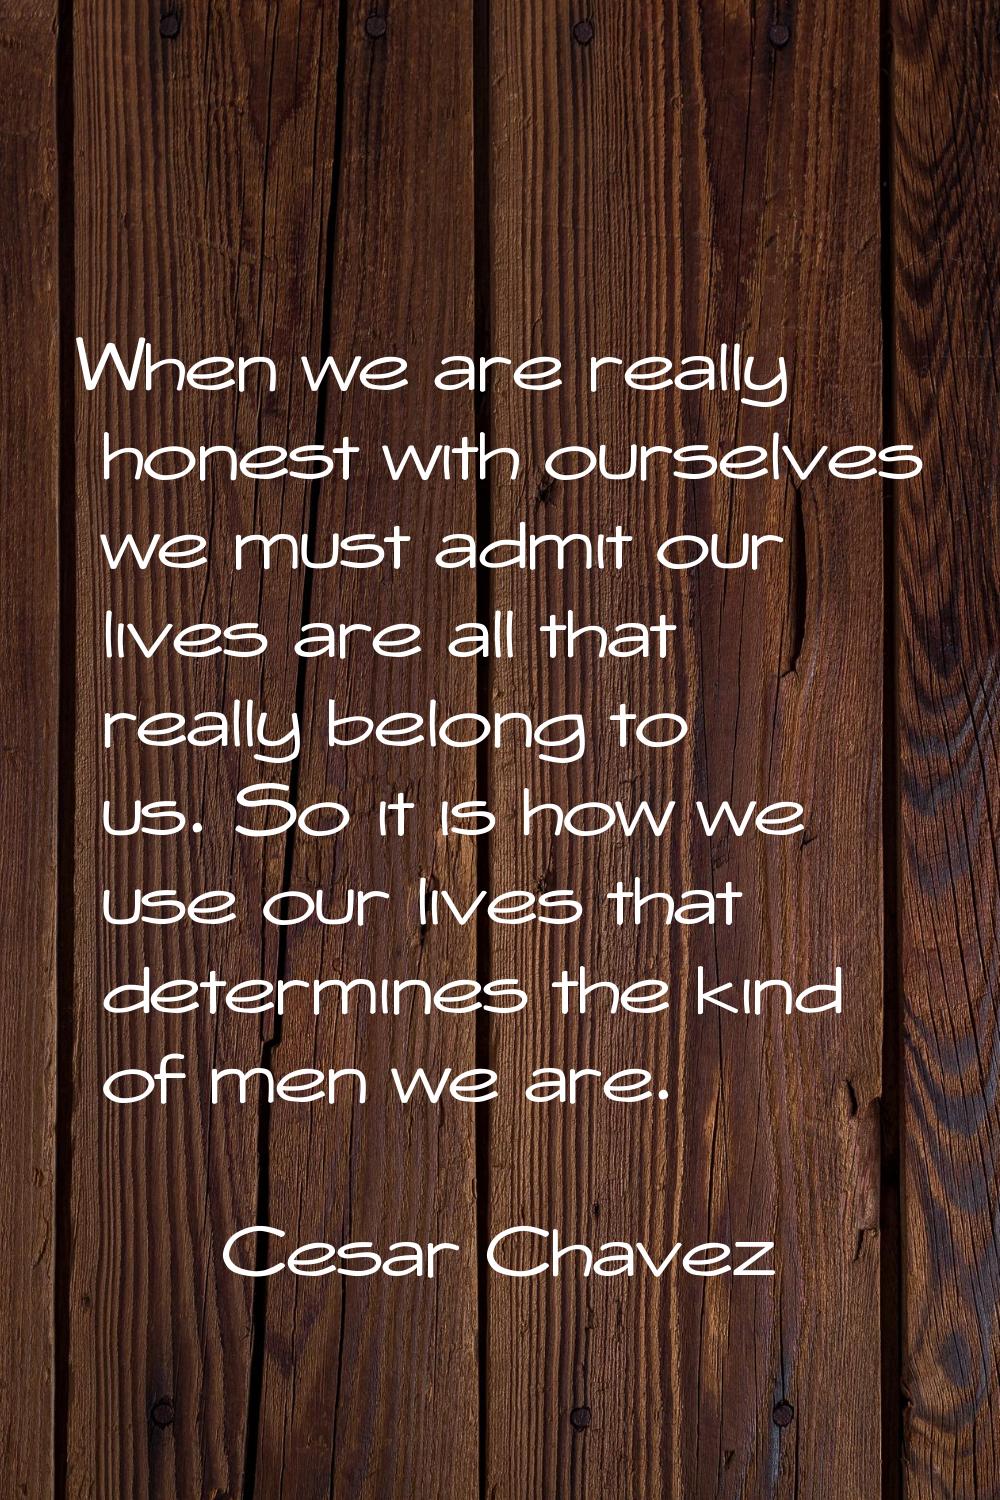 When we are really honest with ourselves we must admit our lives are all that really belong to us. 